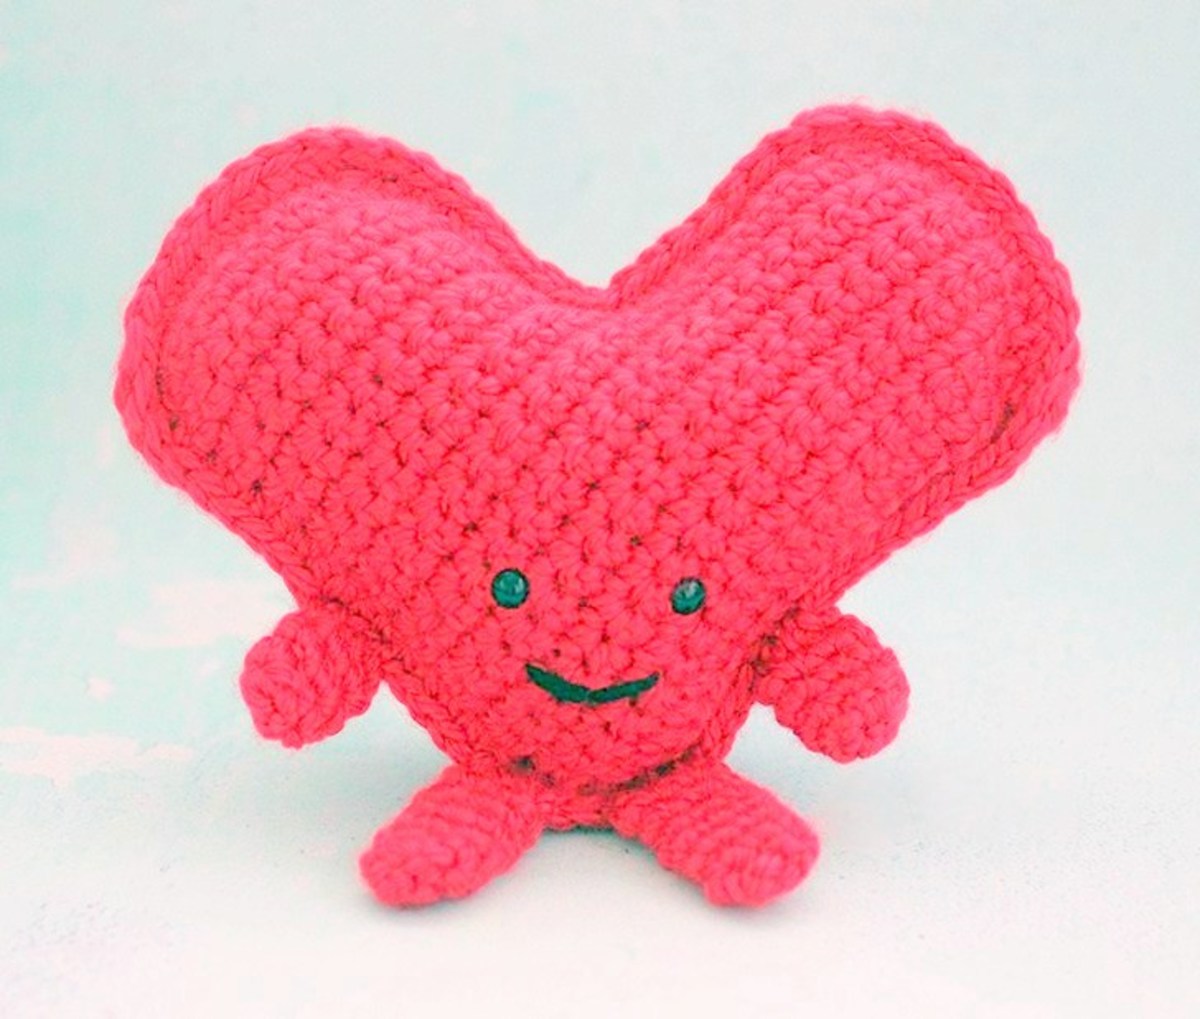 This year, give them your heart. Or a really cute crochet heart.